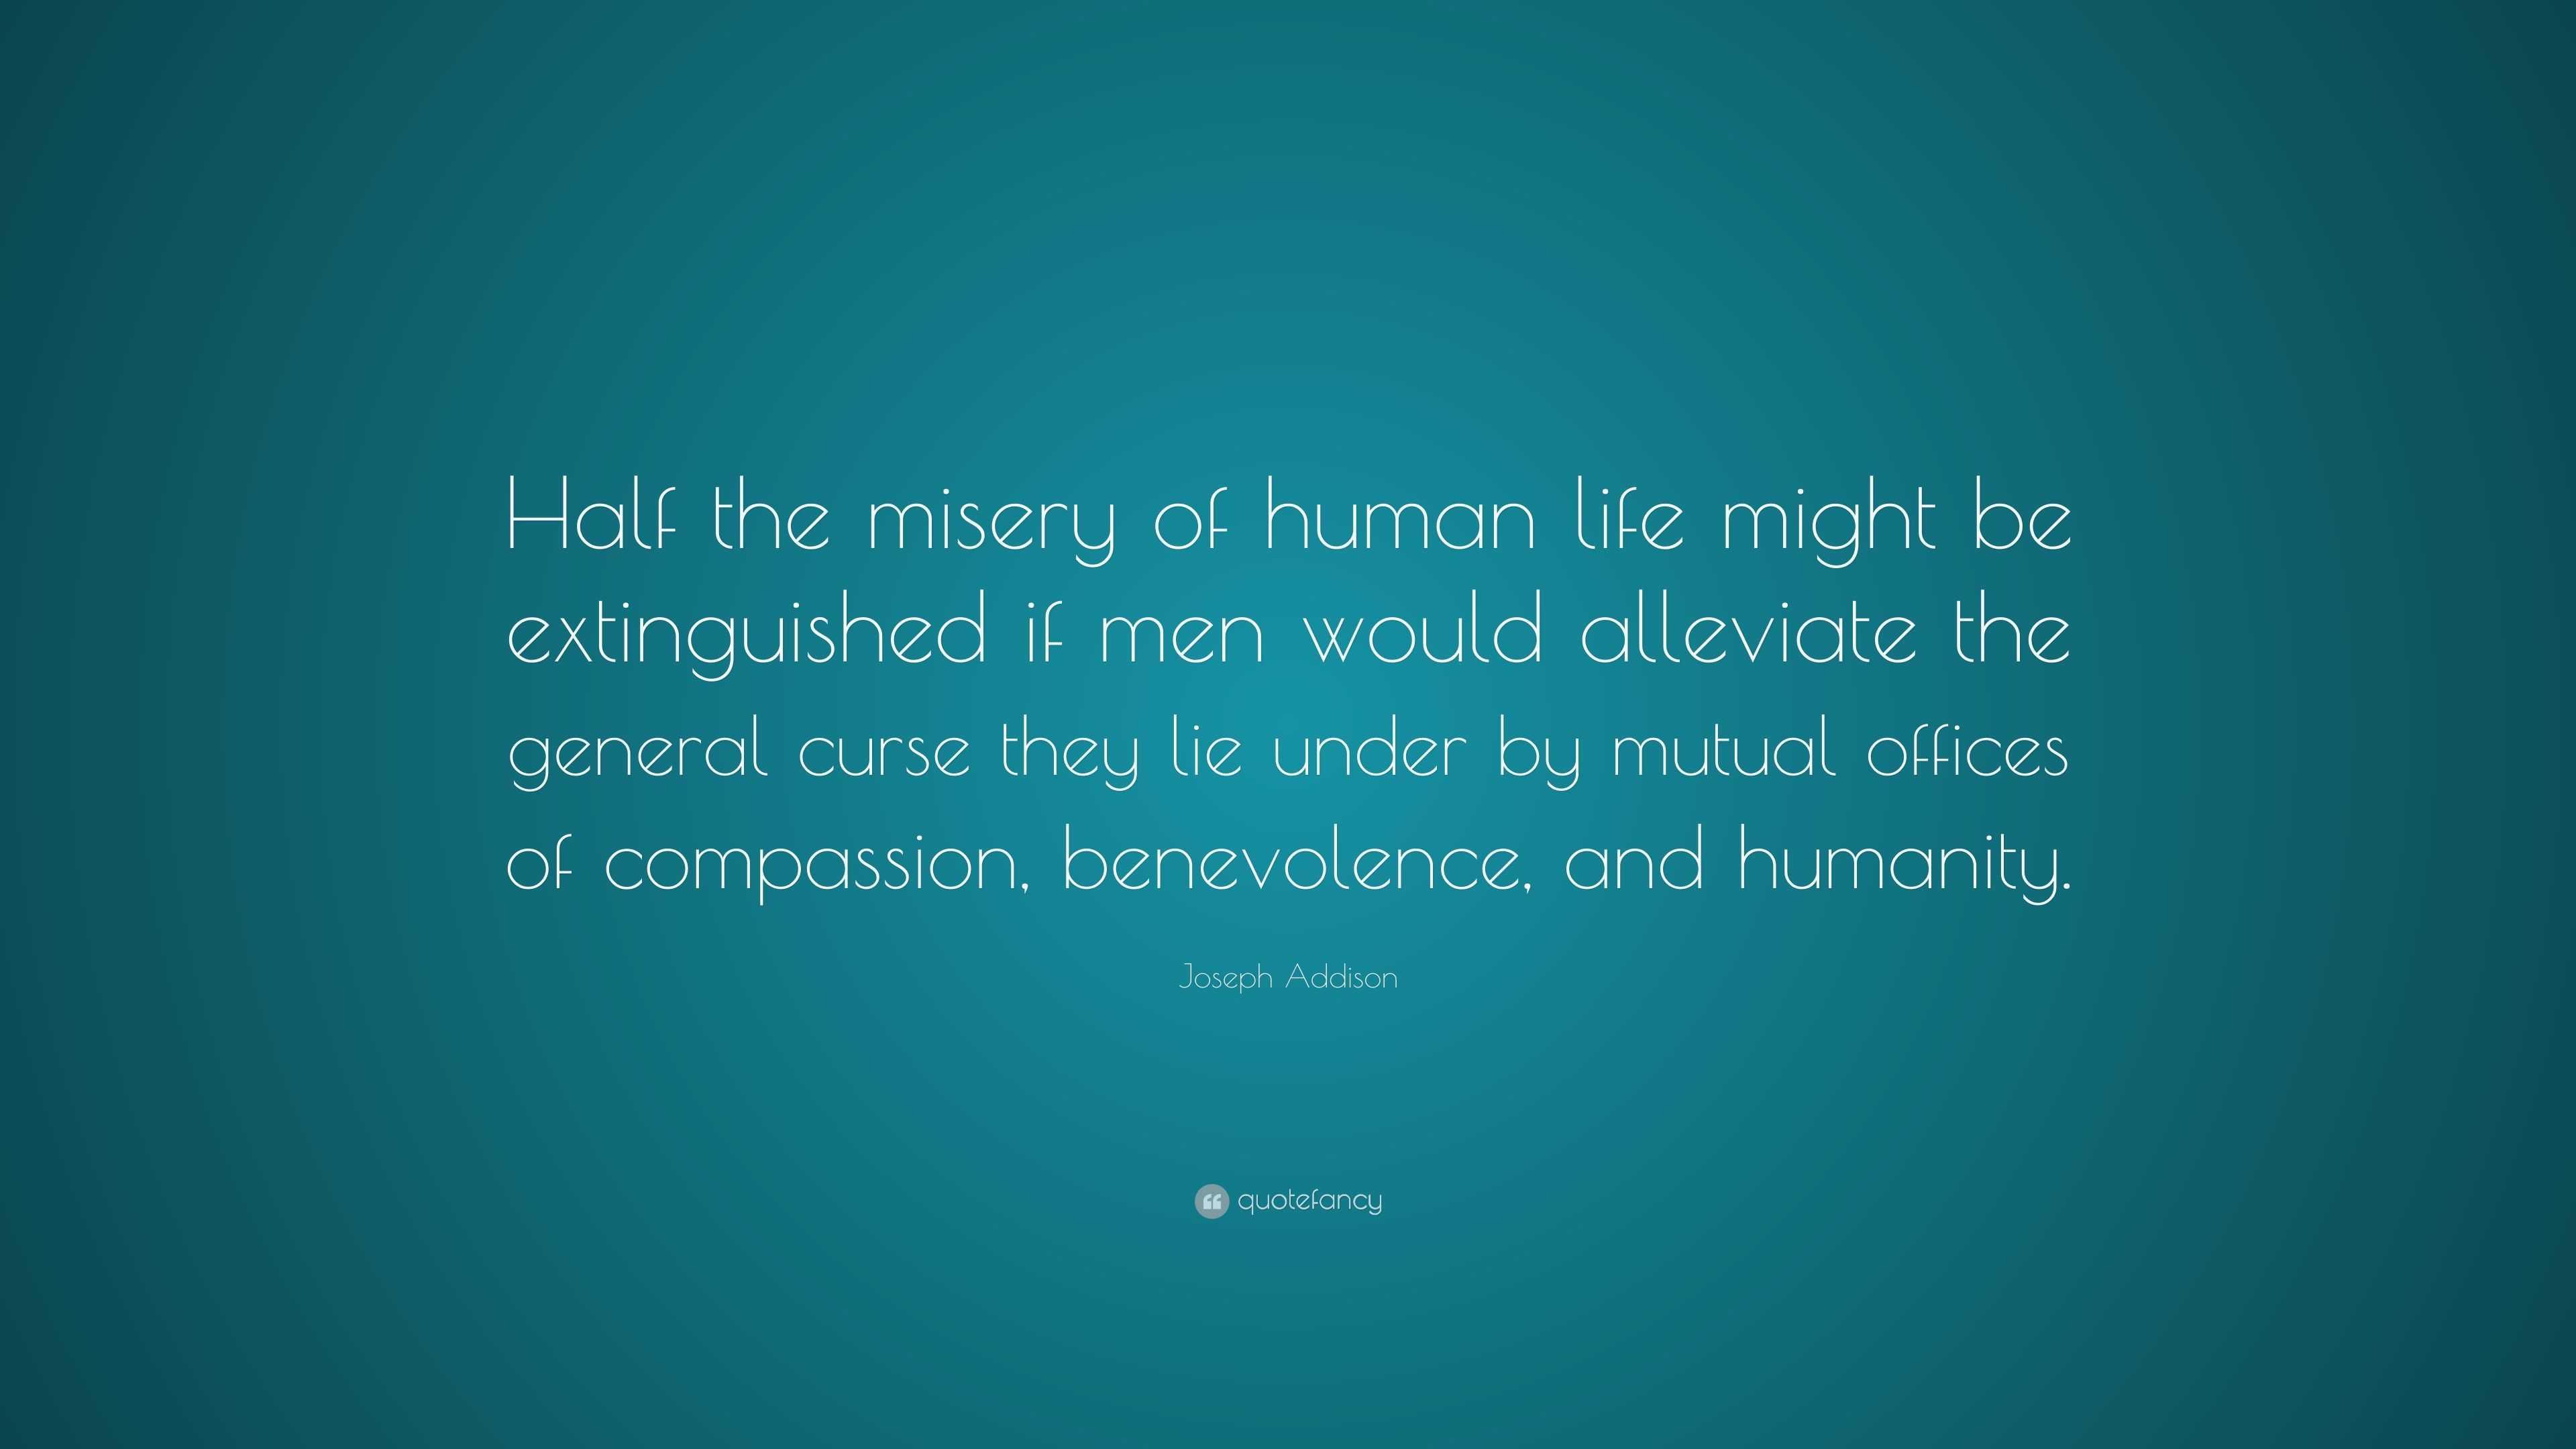 Joseph Addison Quote: “Half the misery of human life might be ...